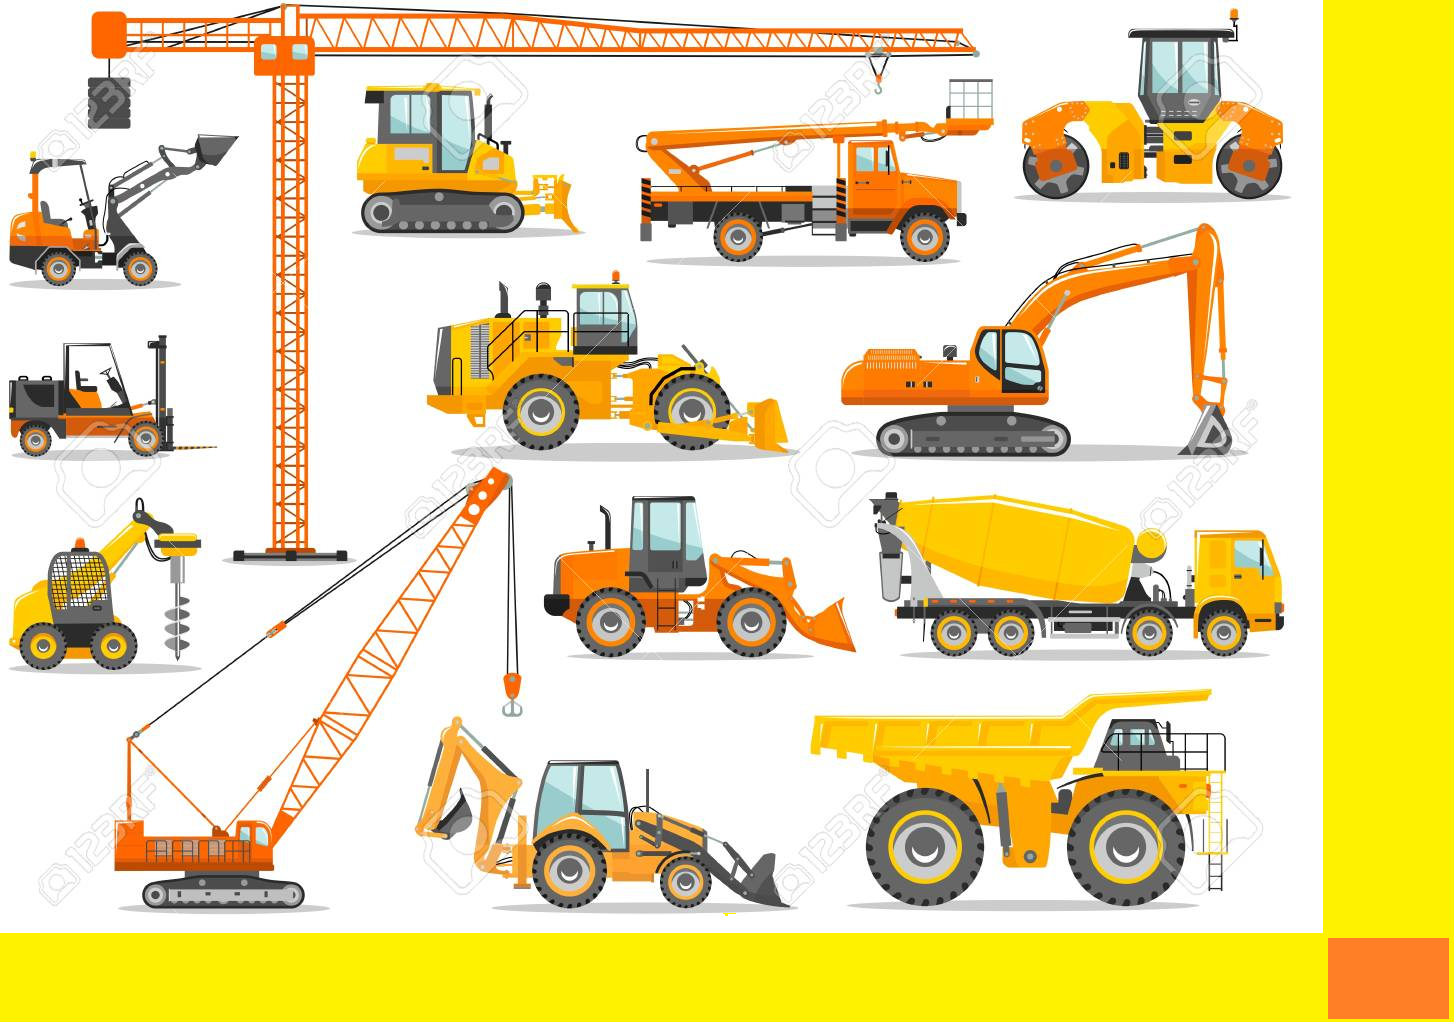 Machineries Used in Construction